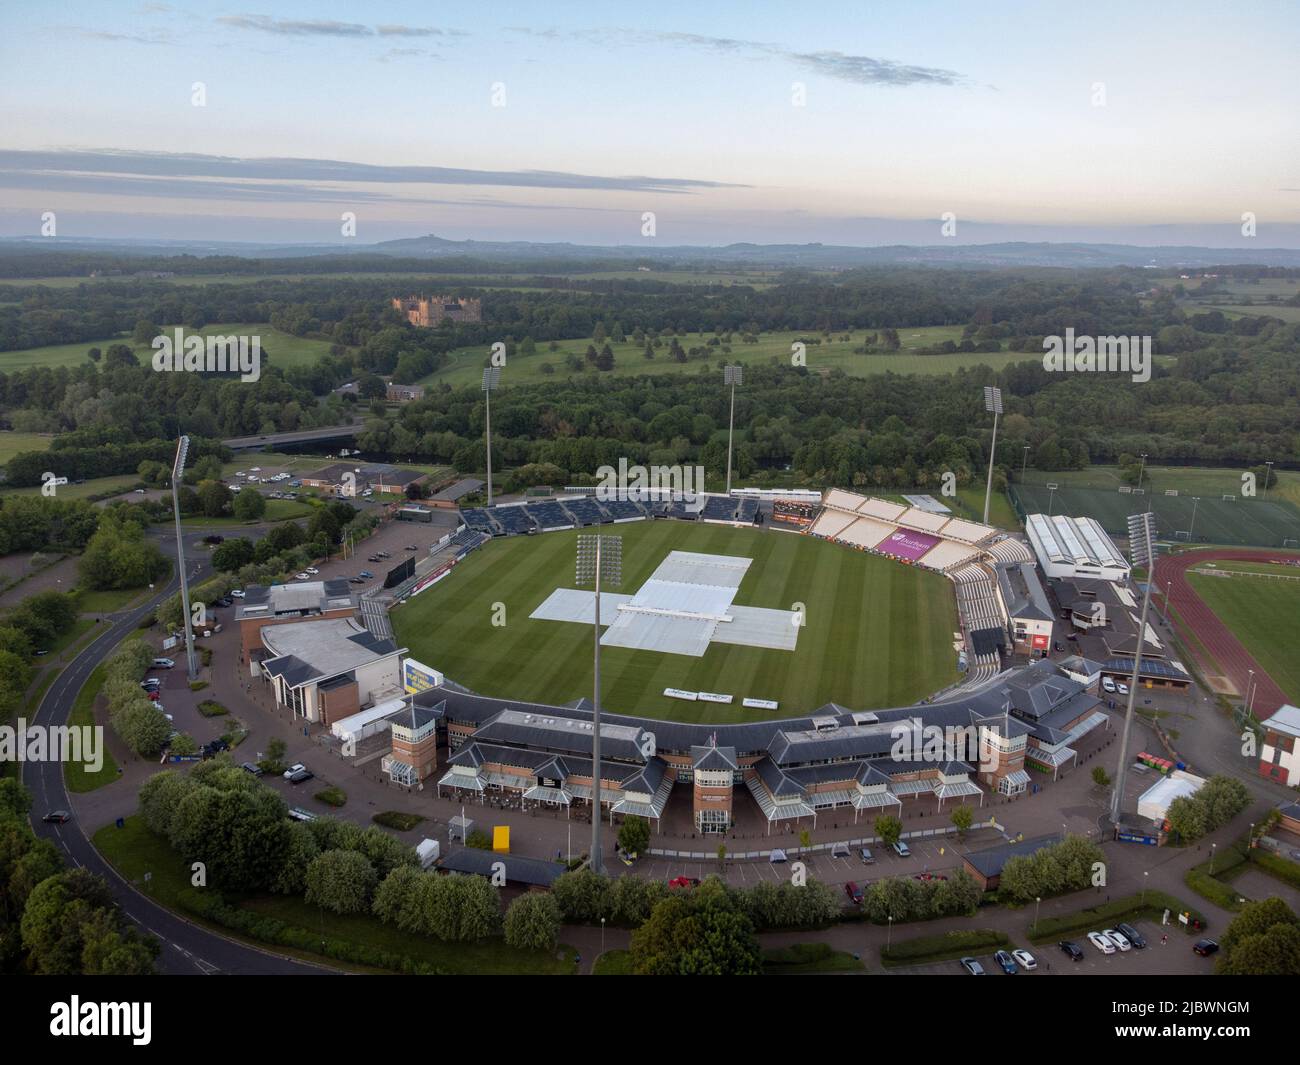 The Riverside Ground, known for sponsorship reasons as the Seat Unique Riverside, is a cricket venue in Chester-le-Street, County Durham, England. Stock Photo